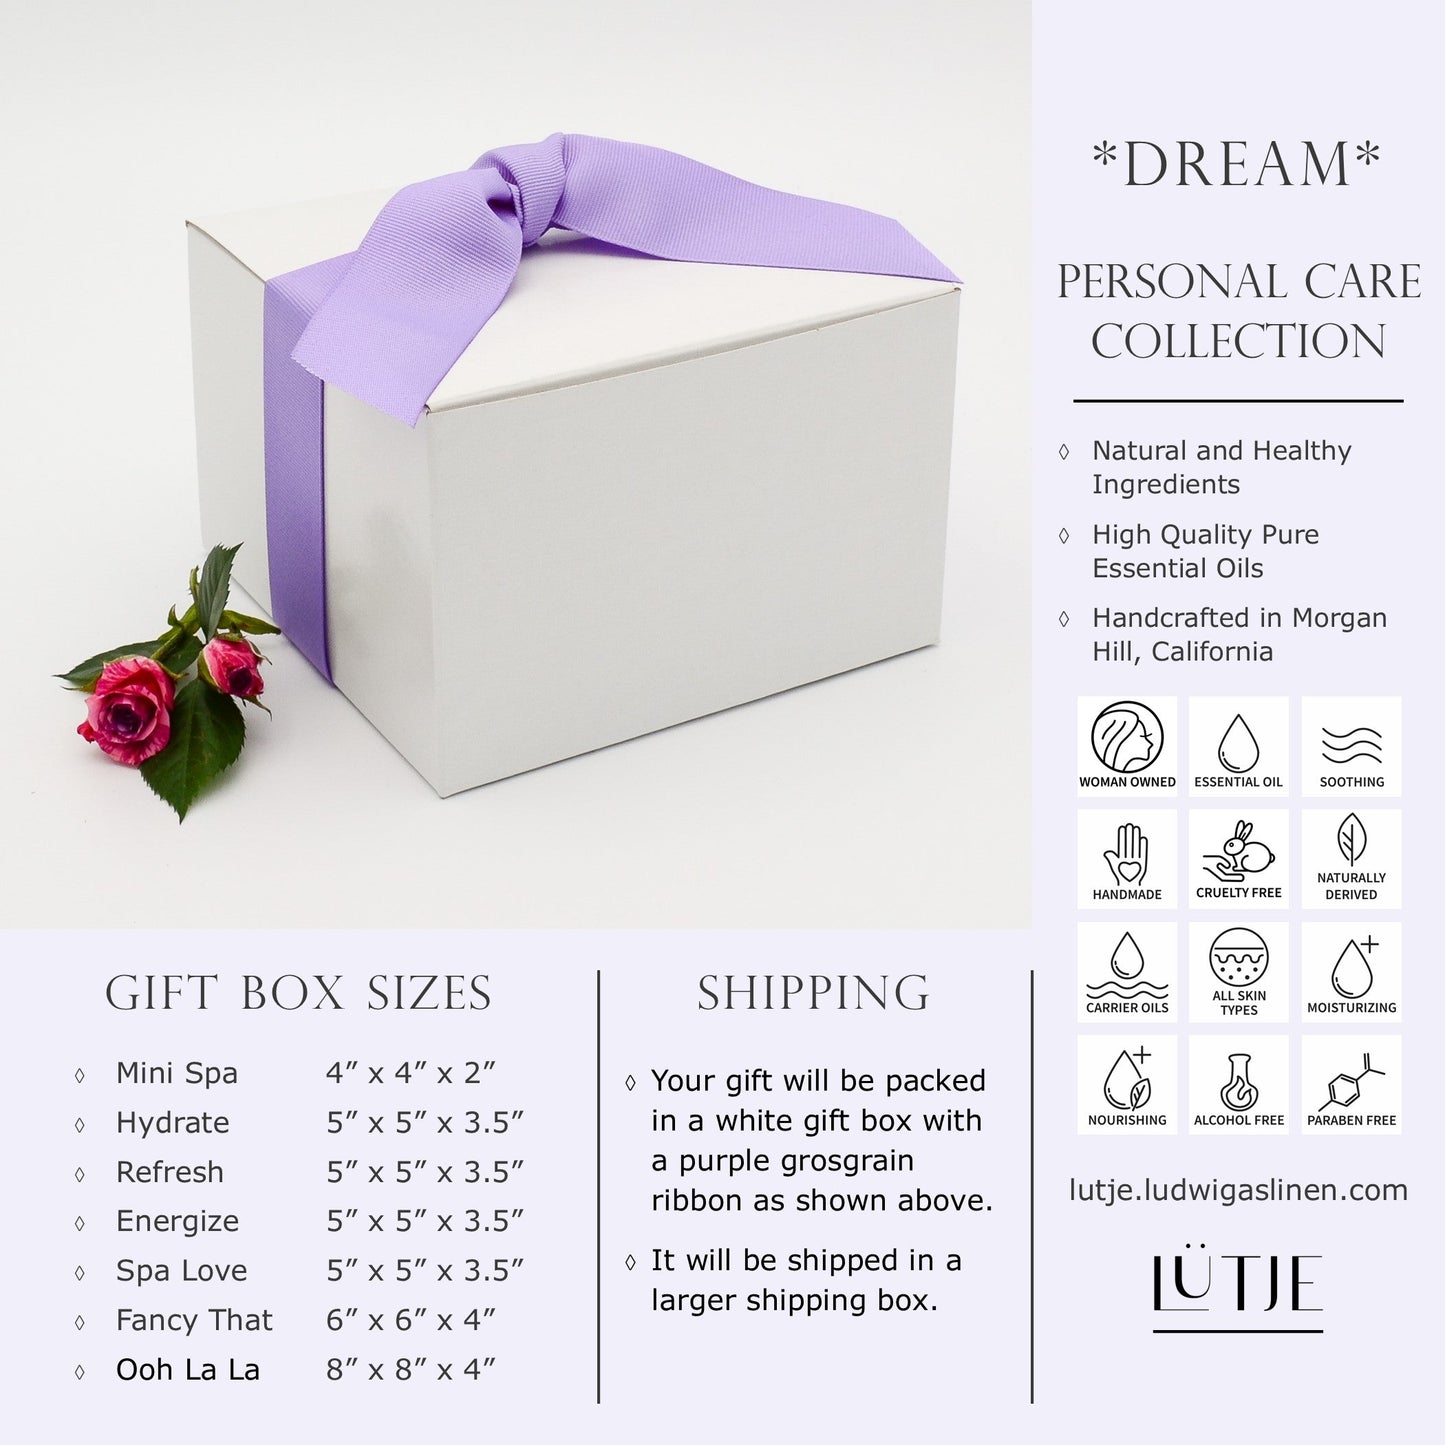 Gift Box for women Lavender & Lemongrass Arise Collection shipping and general information including made with natural and healthy ingredients,woman owned, handmade, cruelty free, naturally derived, pure essential oils, all skin types, moisturizing, soothing, nourishing, alcohol free and paraben free. 